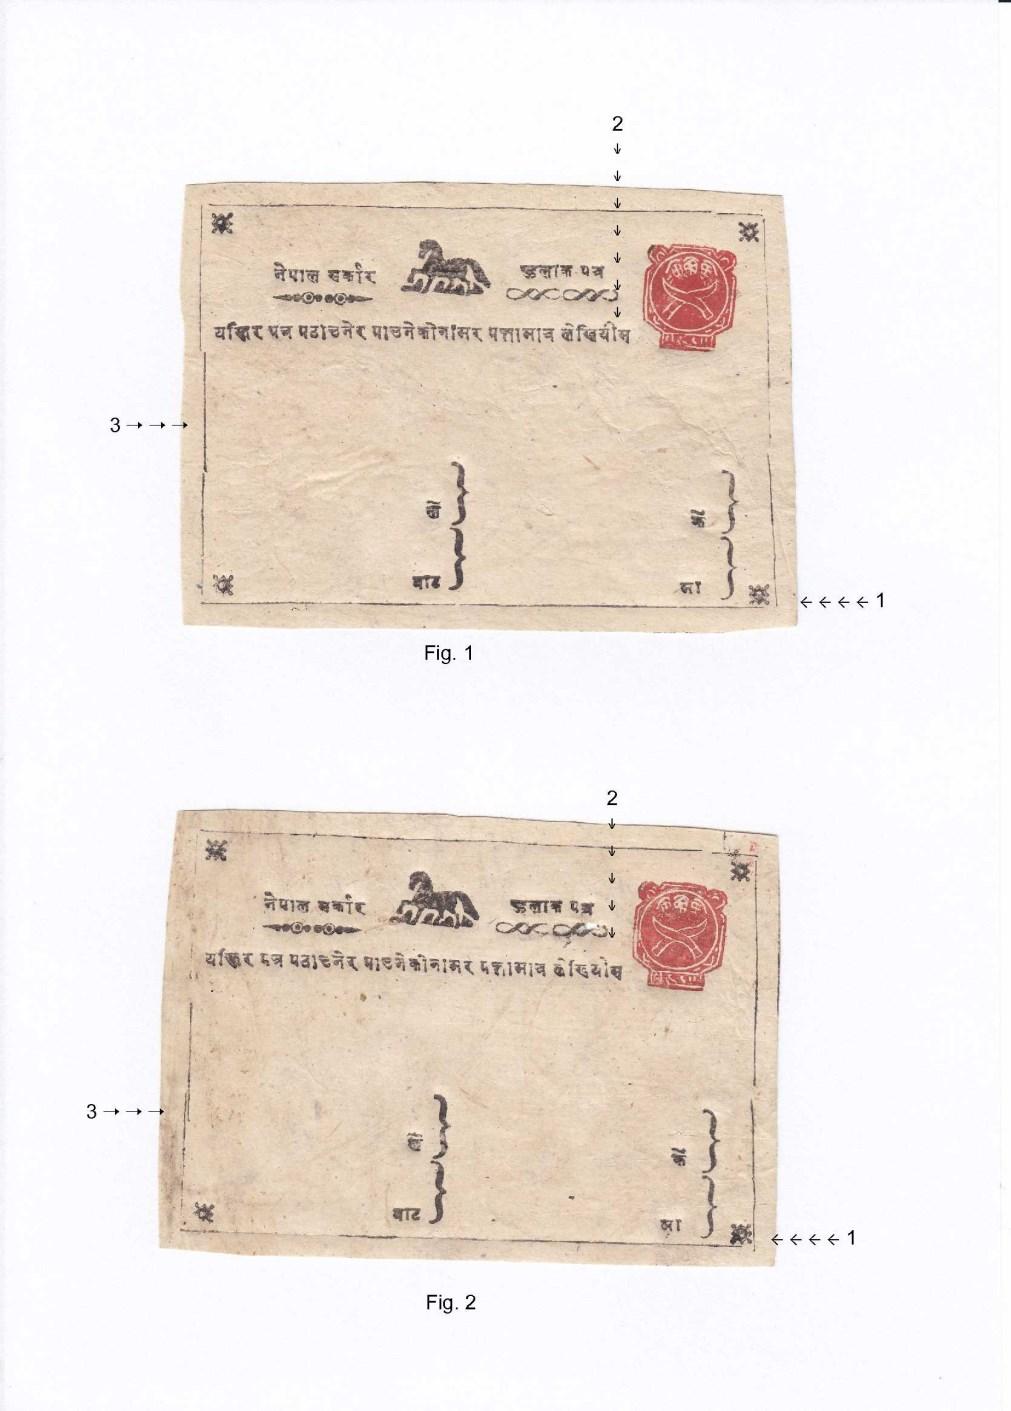 Nepal Postal Stationery Further Printings of Wa 15 by Joachim Bednorz Recently I was able to get hold of a series of horse postal cards of the first printing of Nepal Wa 15 at an auction.